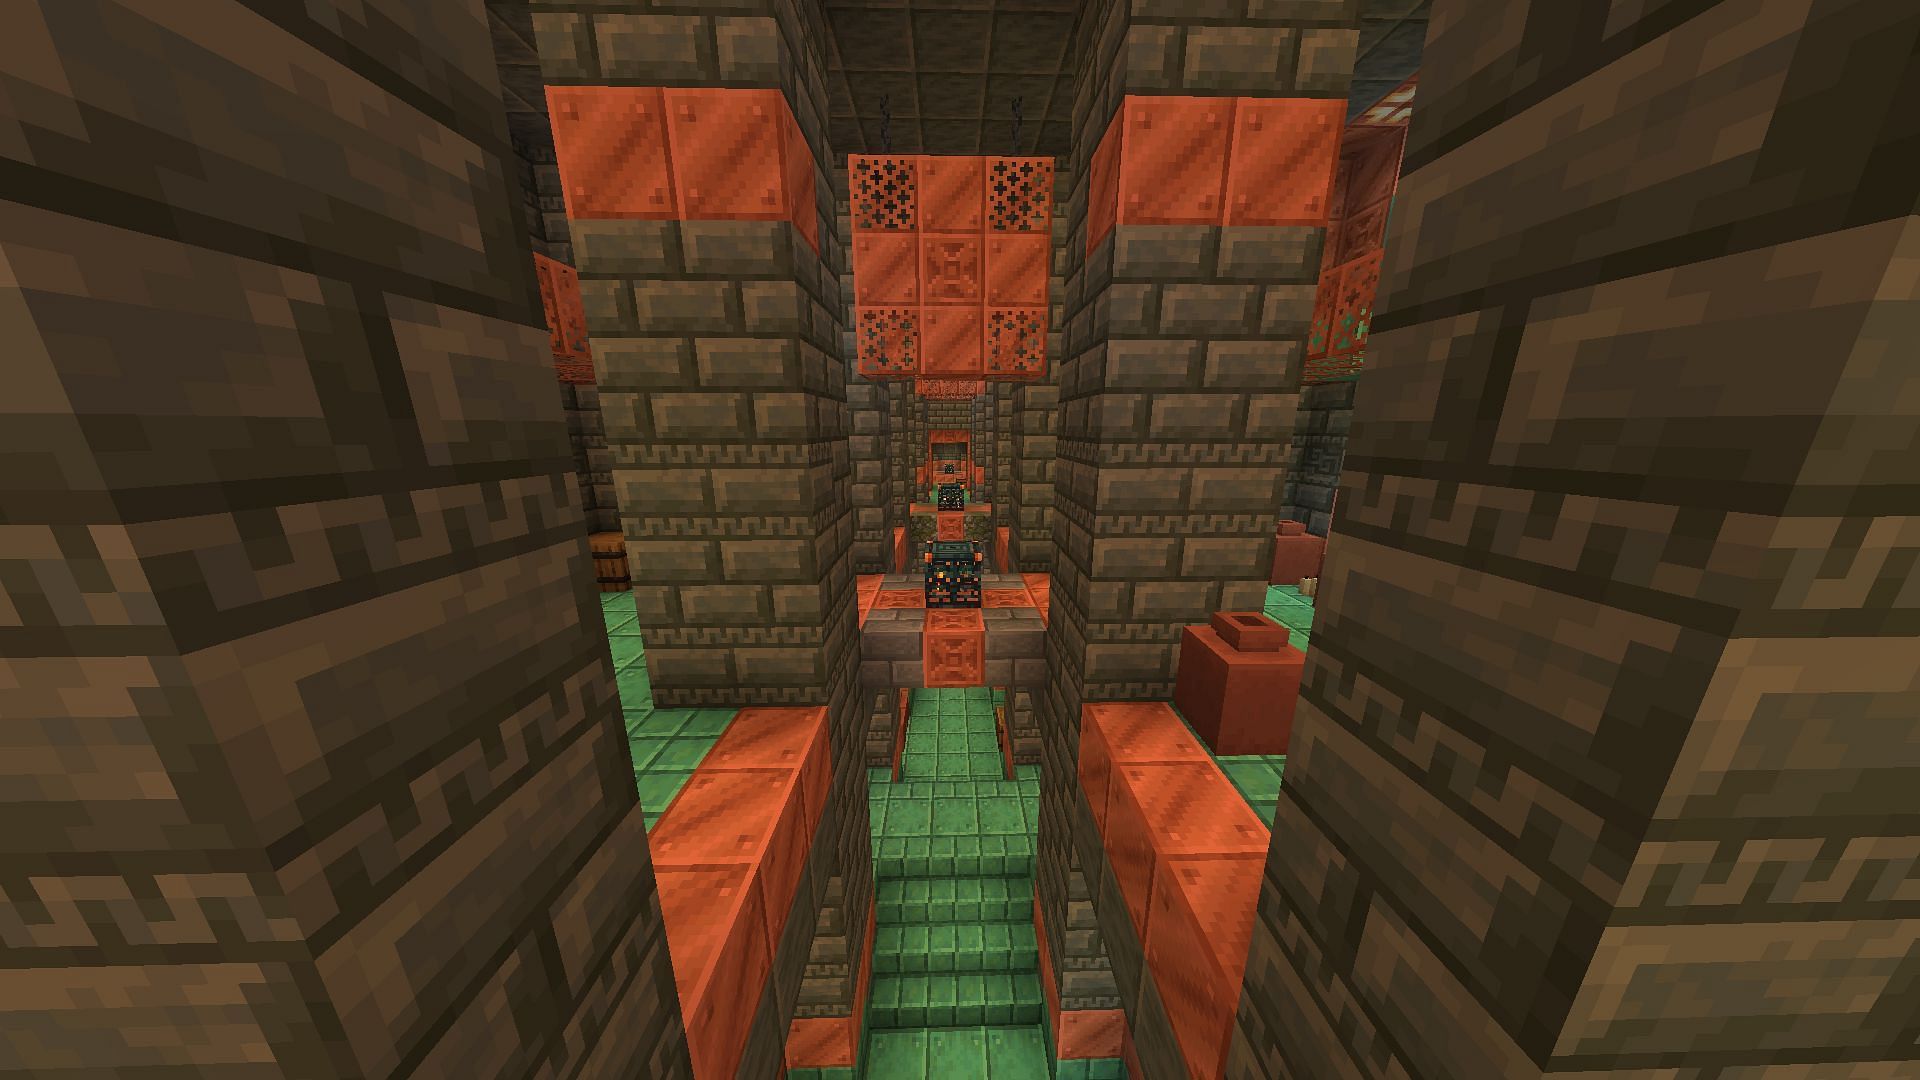 Minecraft builders share their concepts on future trial chamber composition